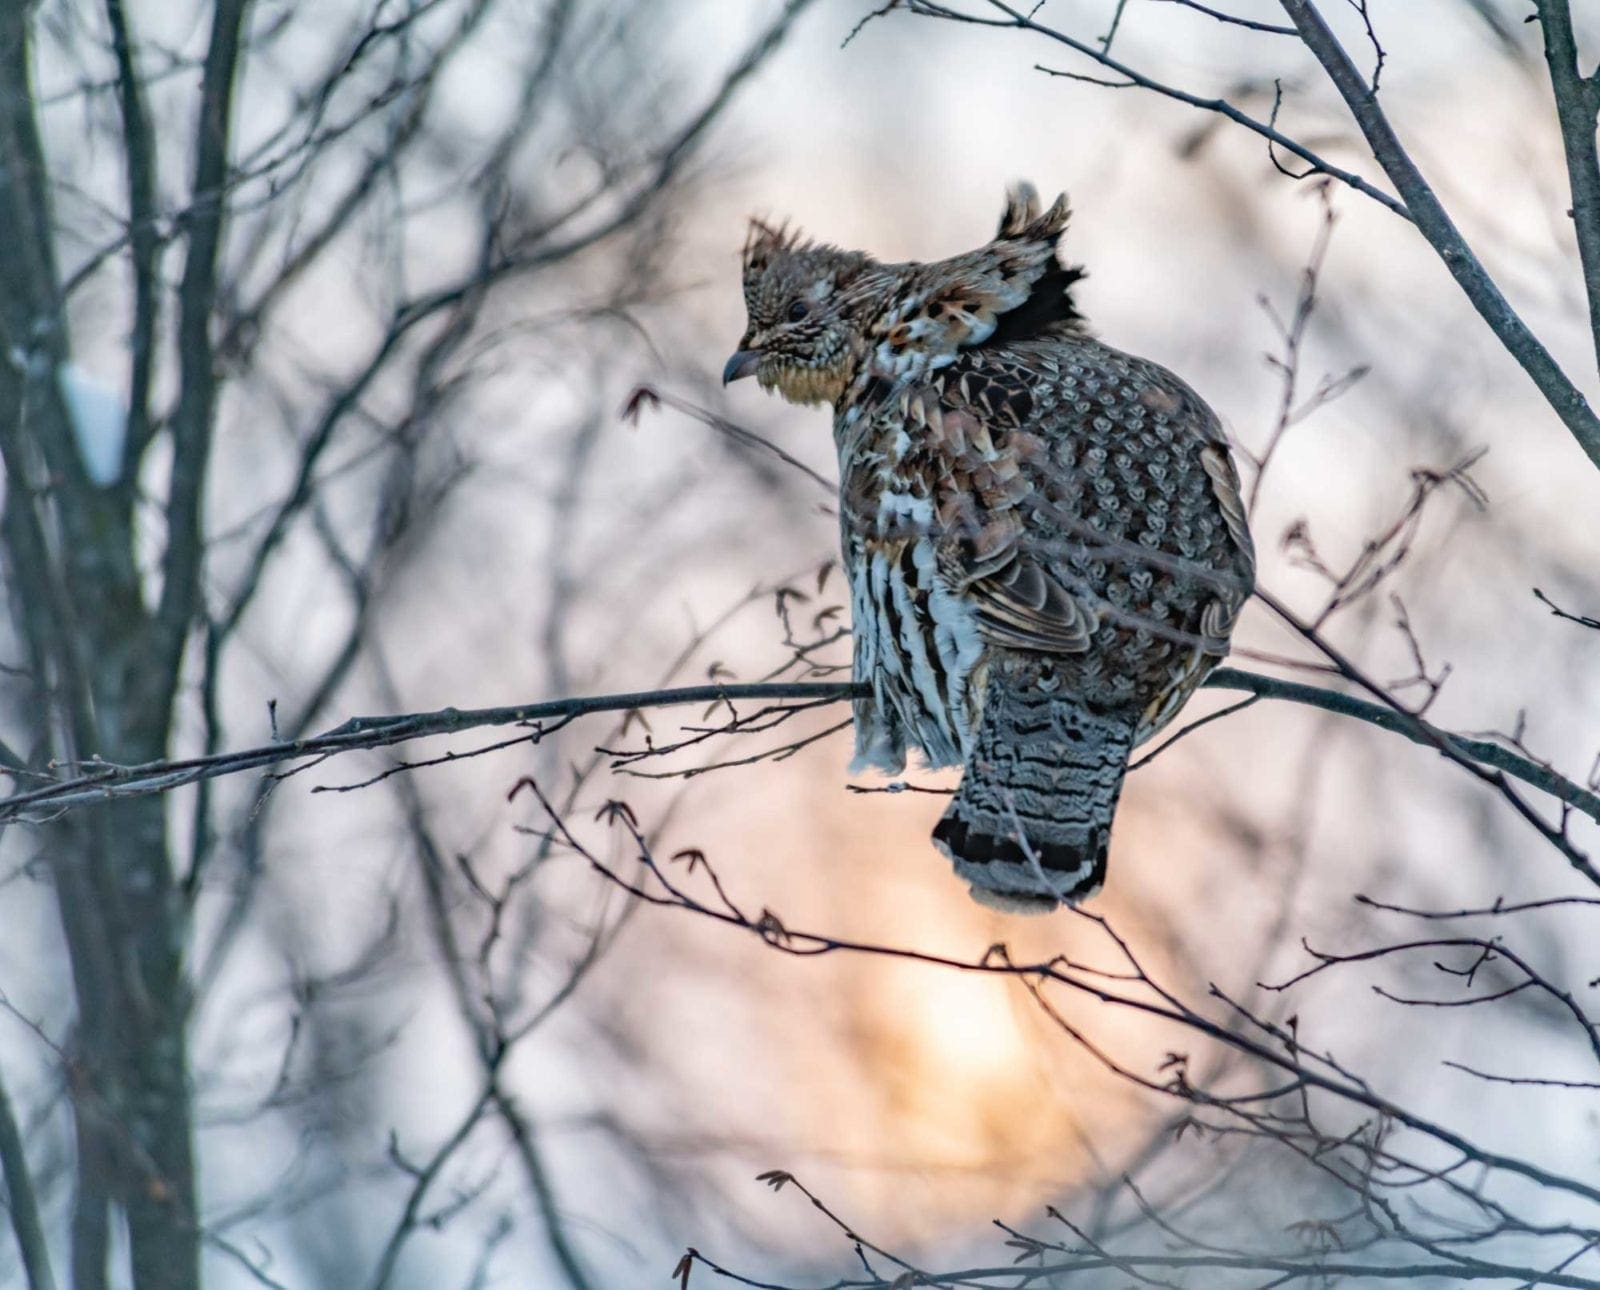 A ruffed grouse on a tree limb in a working forest.